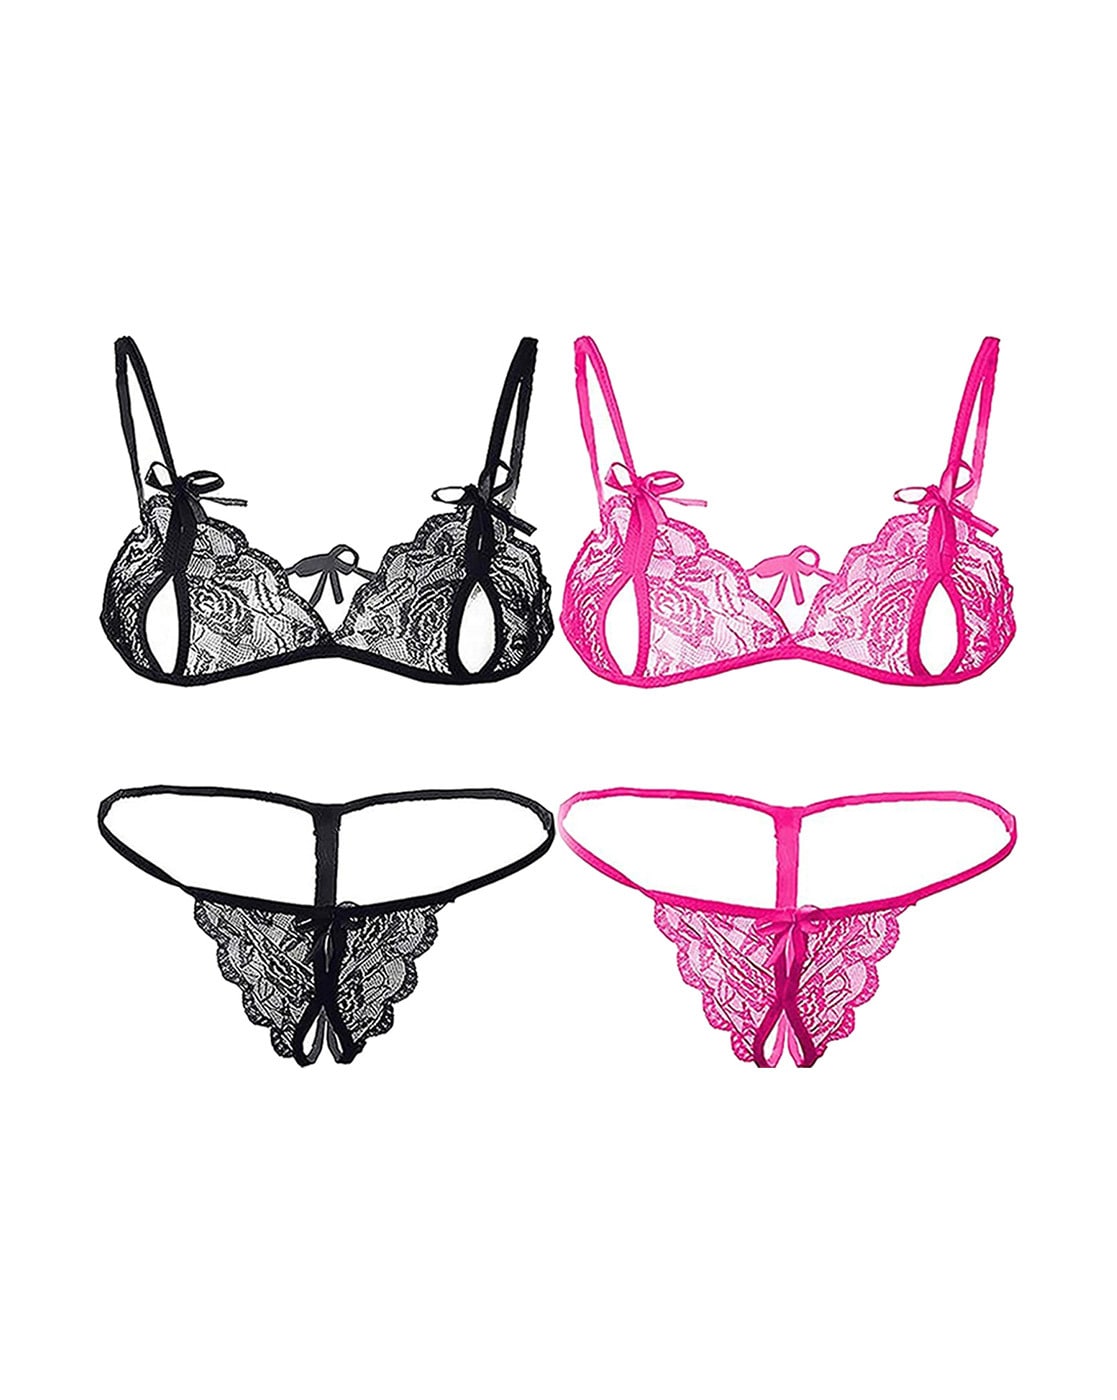 YZHM Women Sexy Lingerie Set Naughty Lace Bra and Panty India